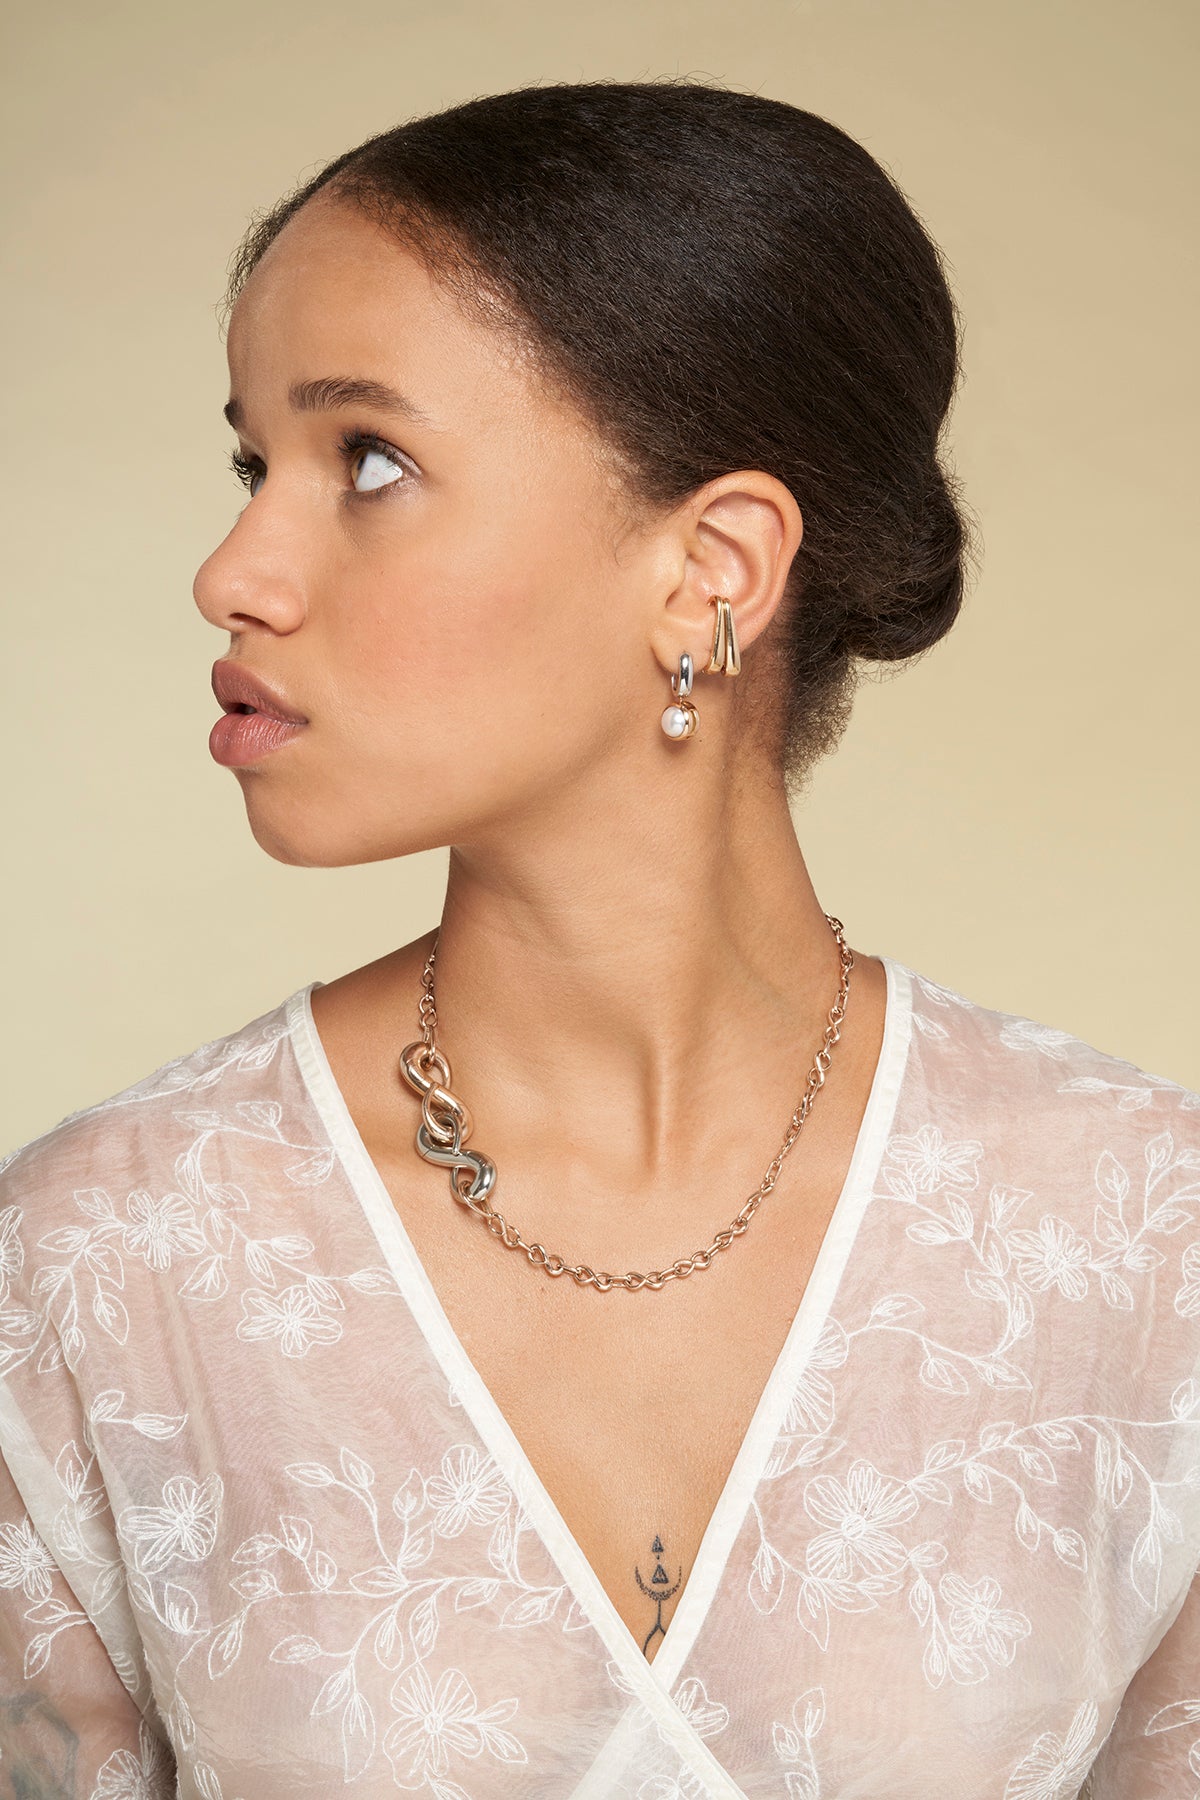 Portrait of woman in white top wearing necklace with silver infinity lock charm and gold infinity lock charm